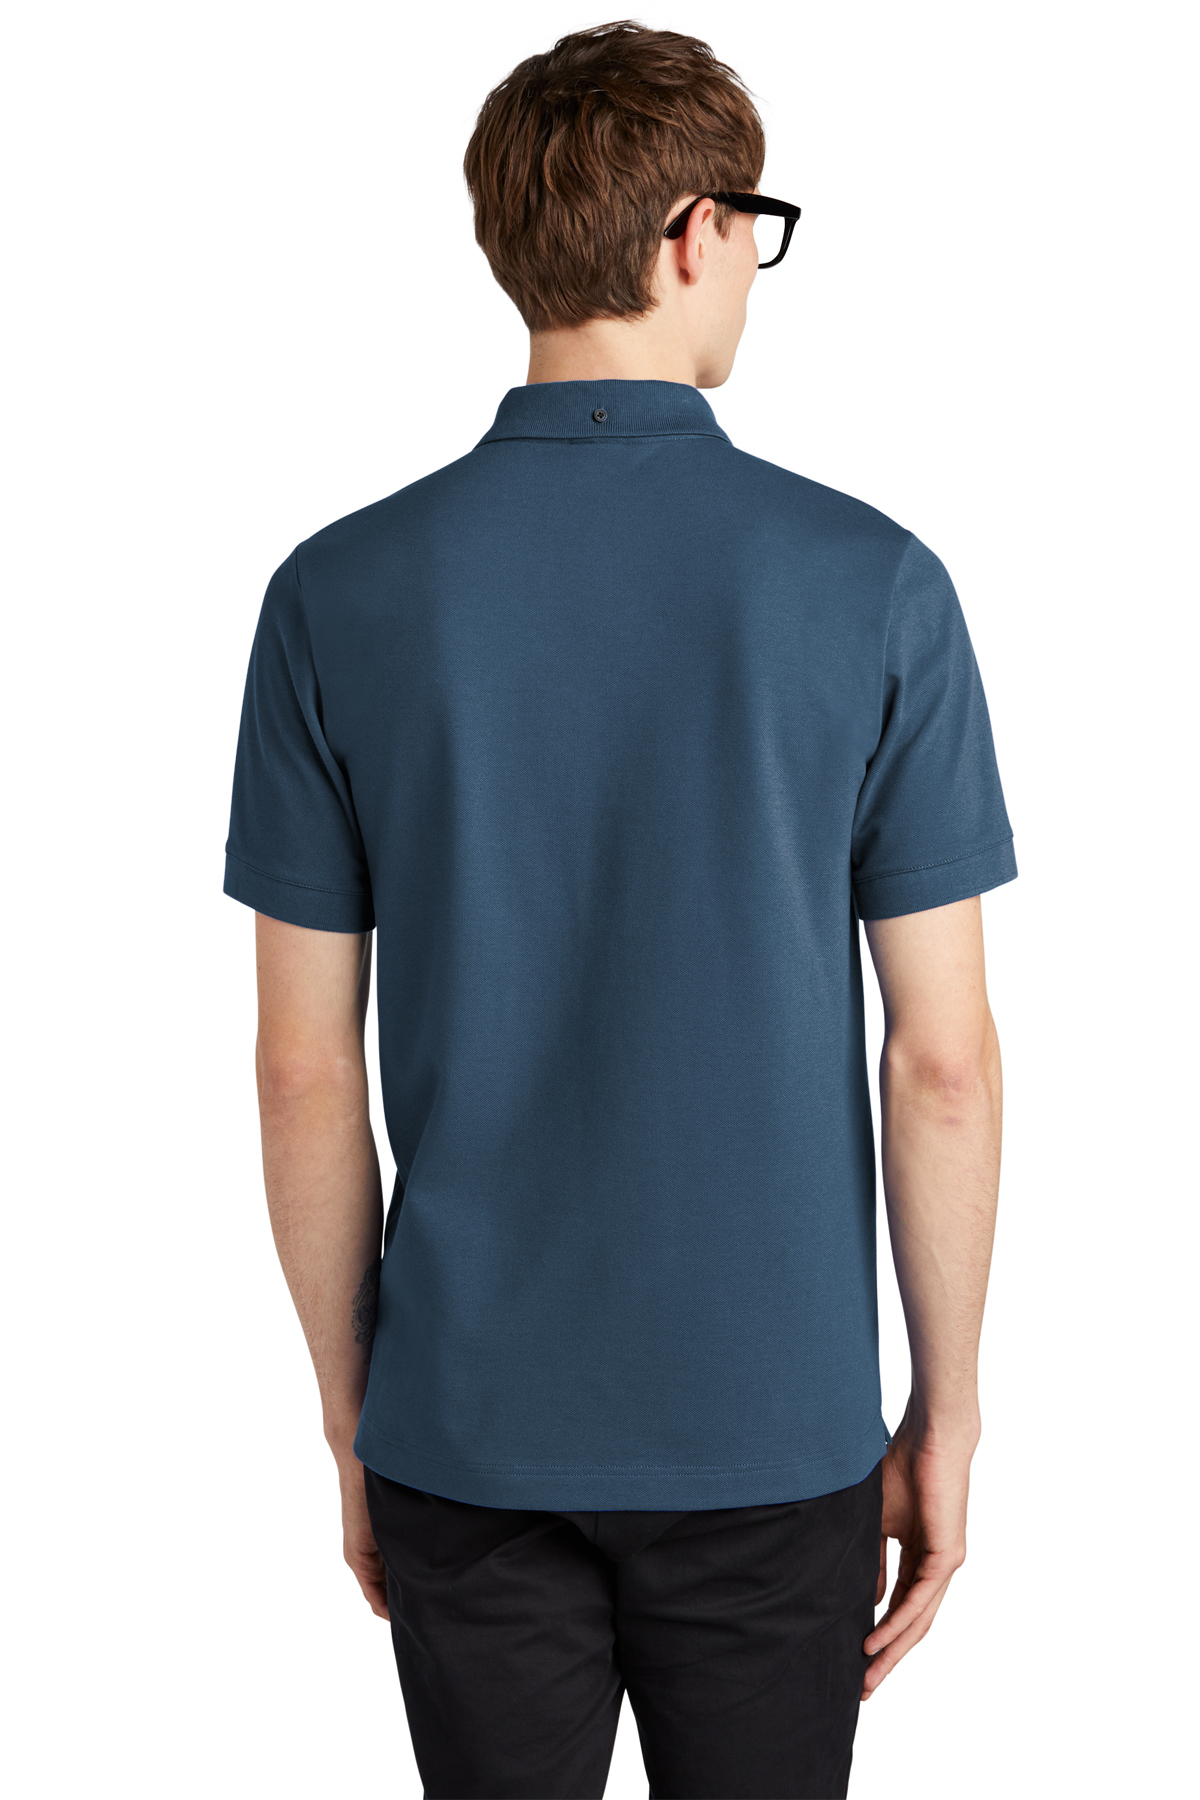 Mercer+Mettle Stretch Heavyweight SanMar Pique | Product Polo 